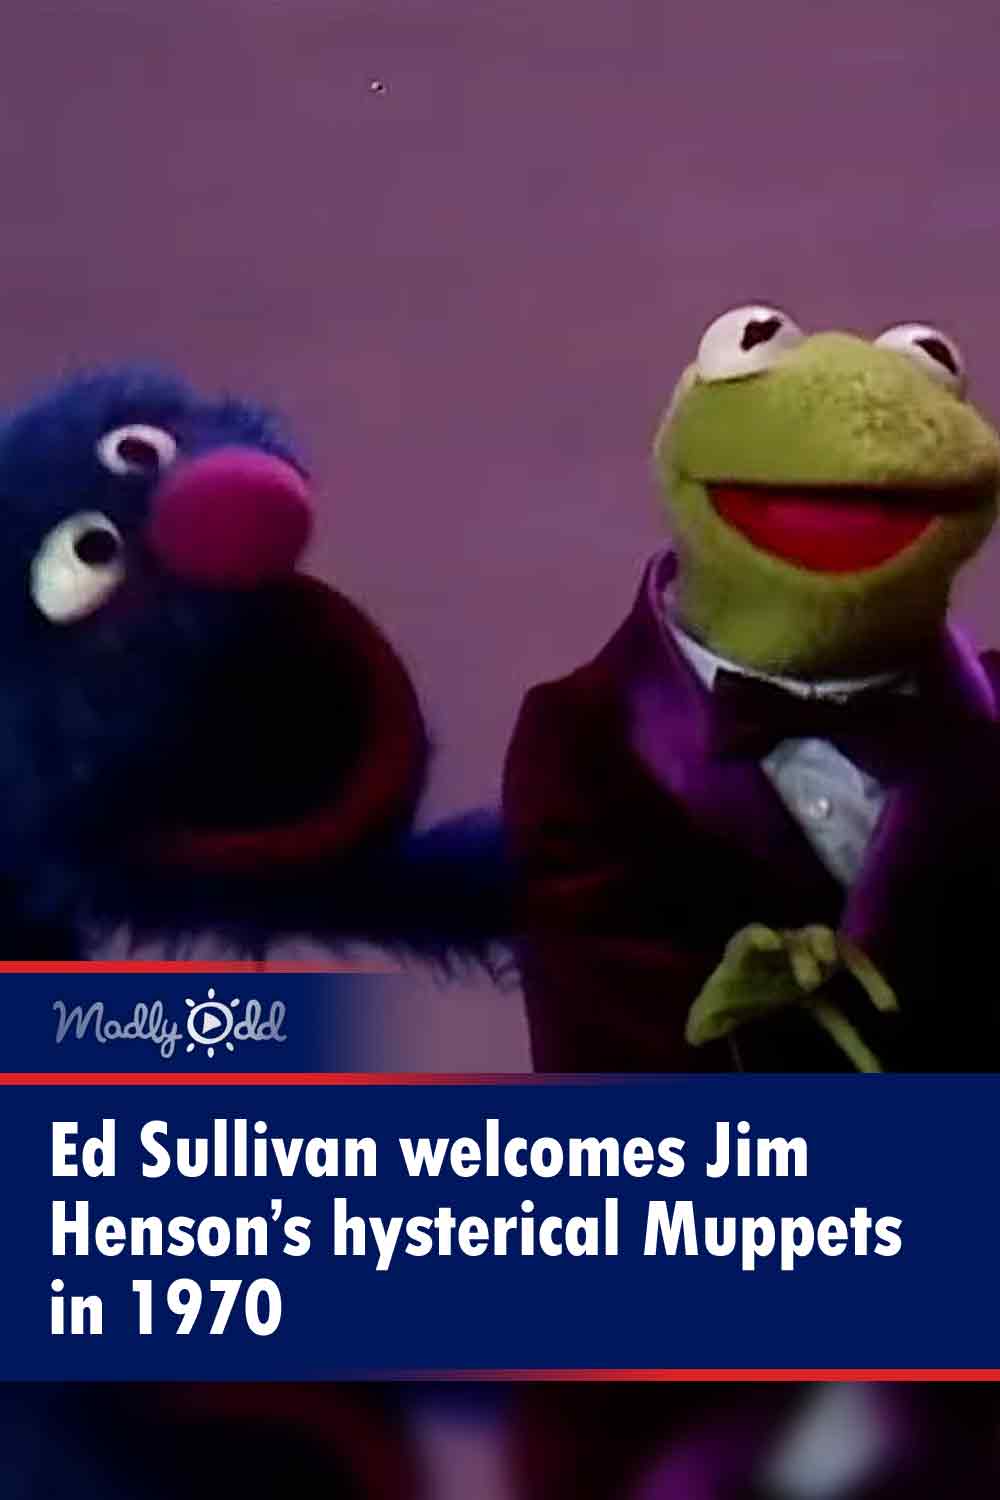 Ed Sullivan welcomes Jim Henson’s hysterical Muppets in 1970